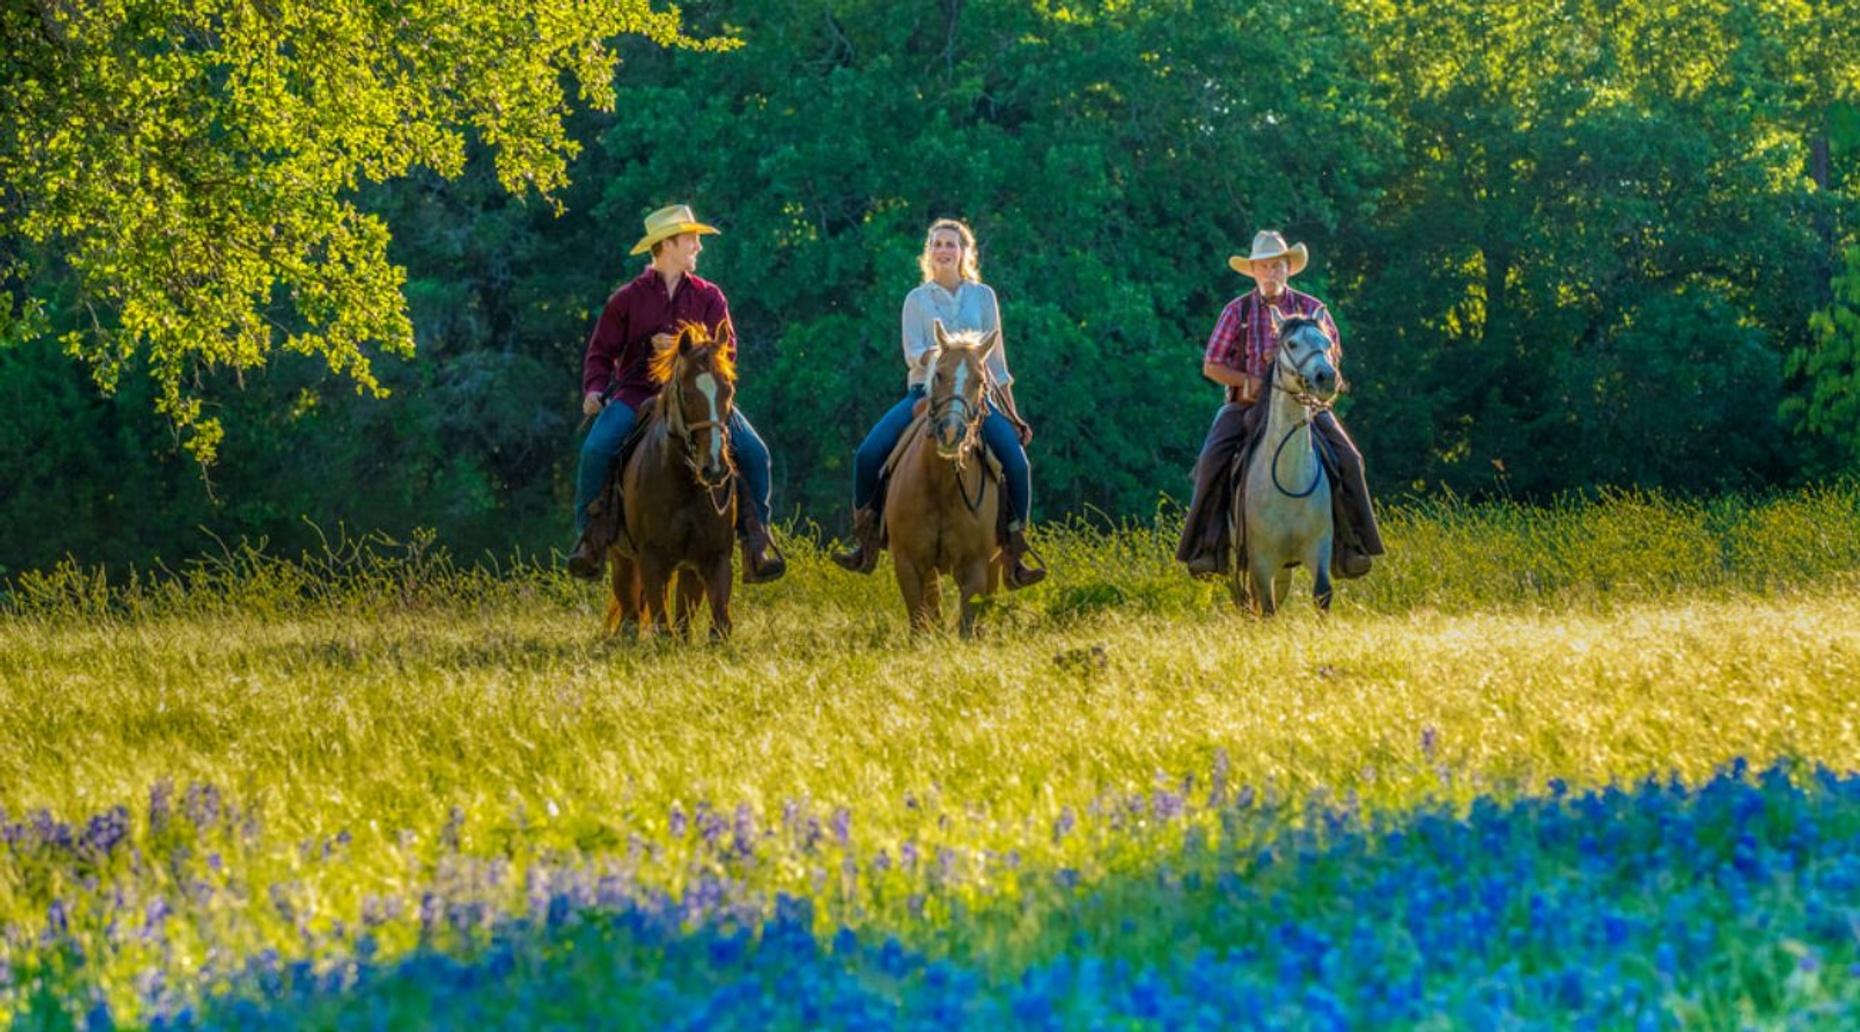 The Lone Star's 2-Hour Sunset Horse Ride in Waco